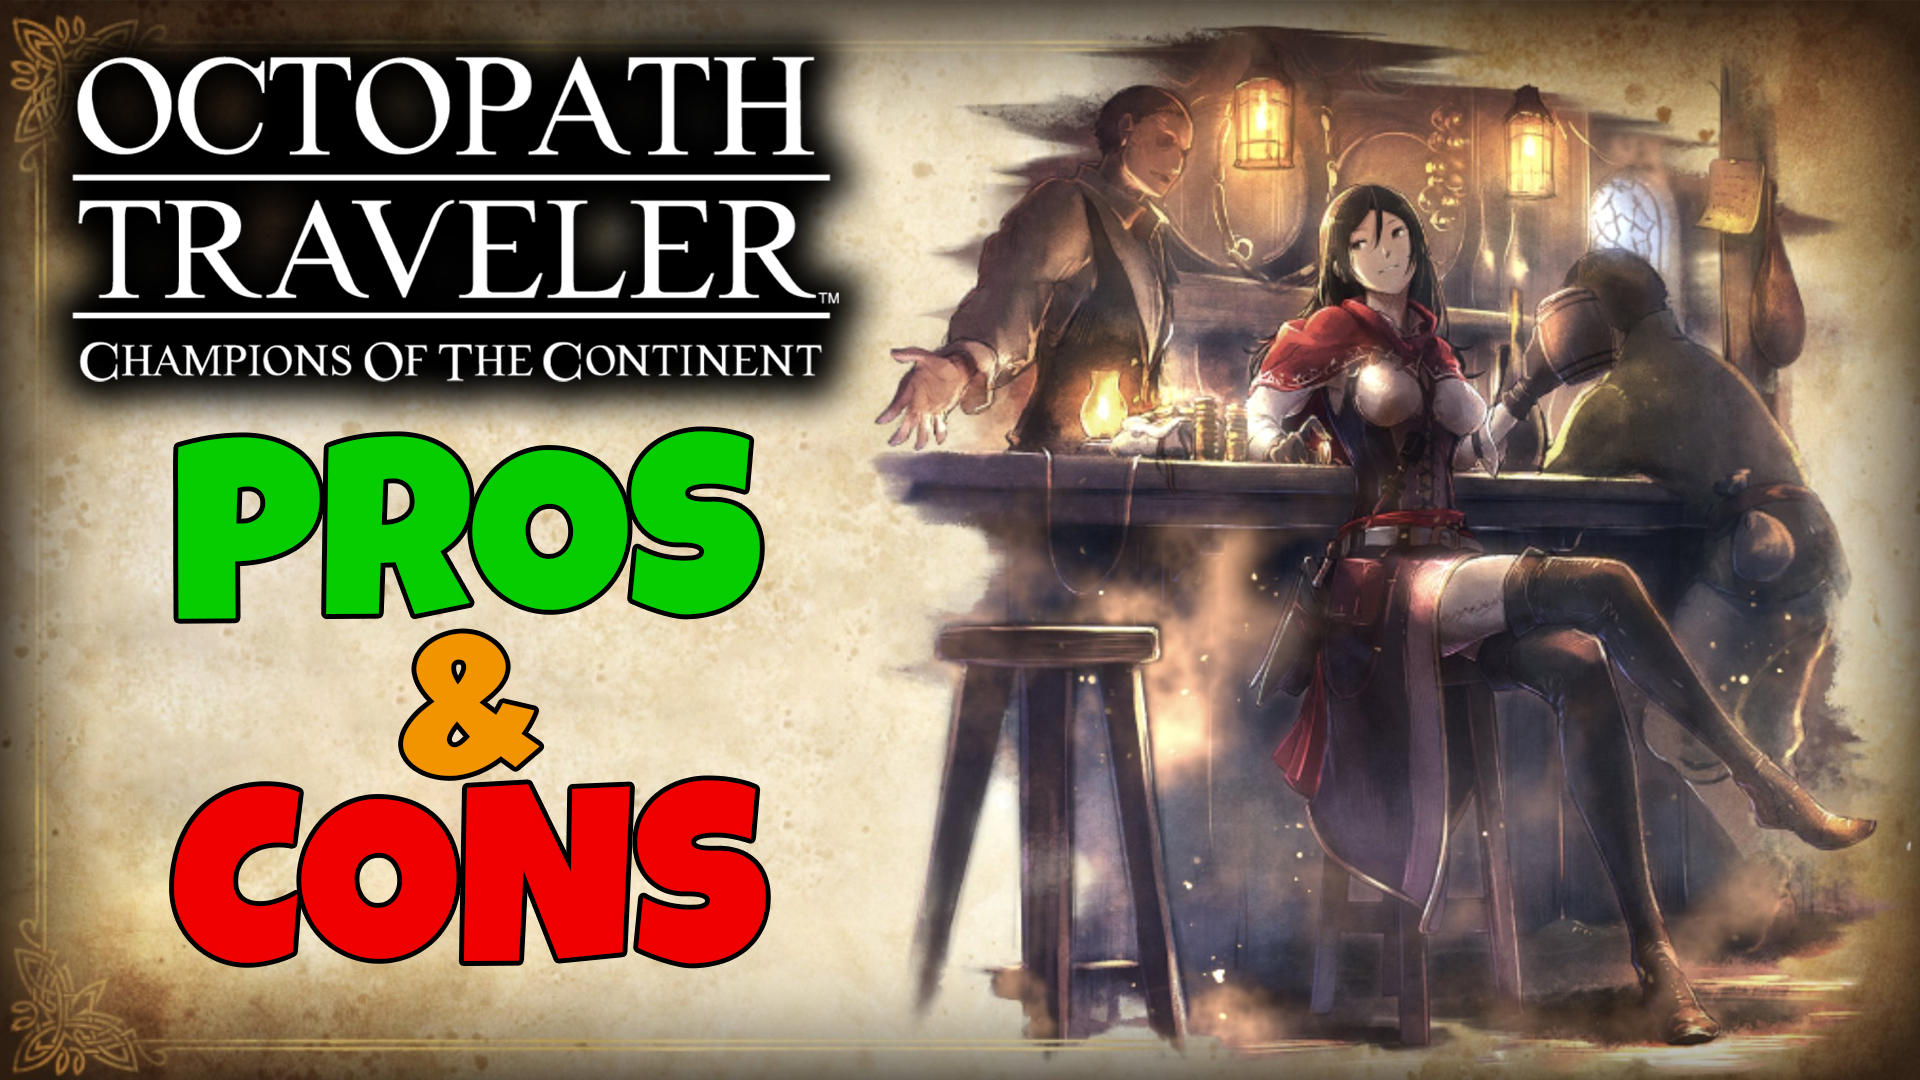 Octopath Traveler - Champions of the Continent (CotC)